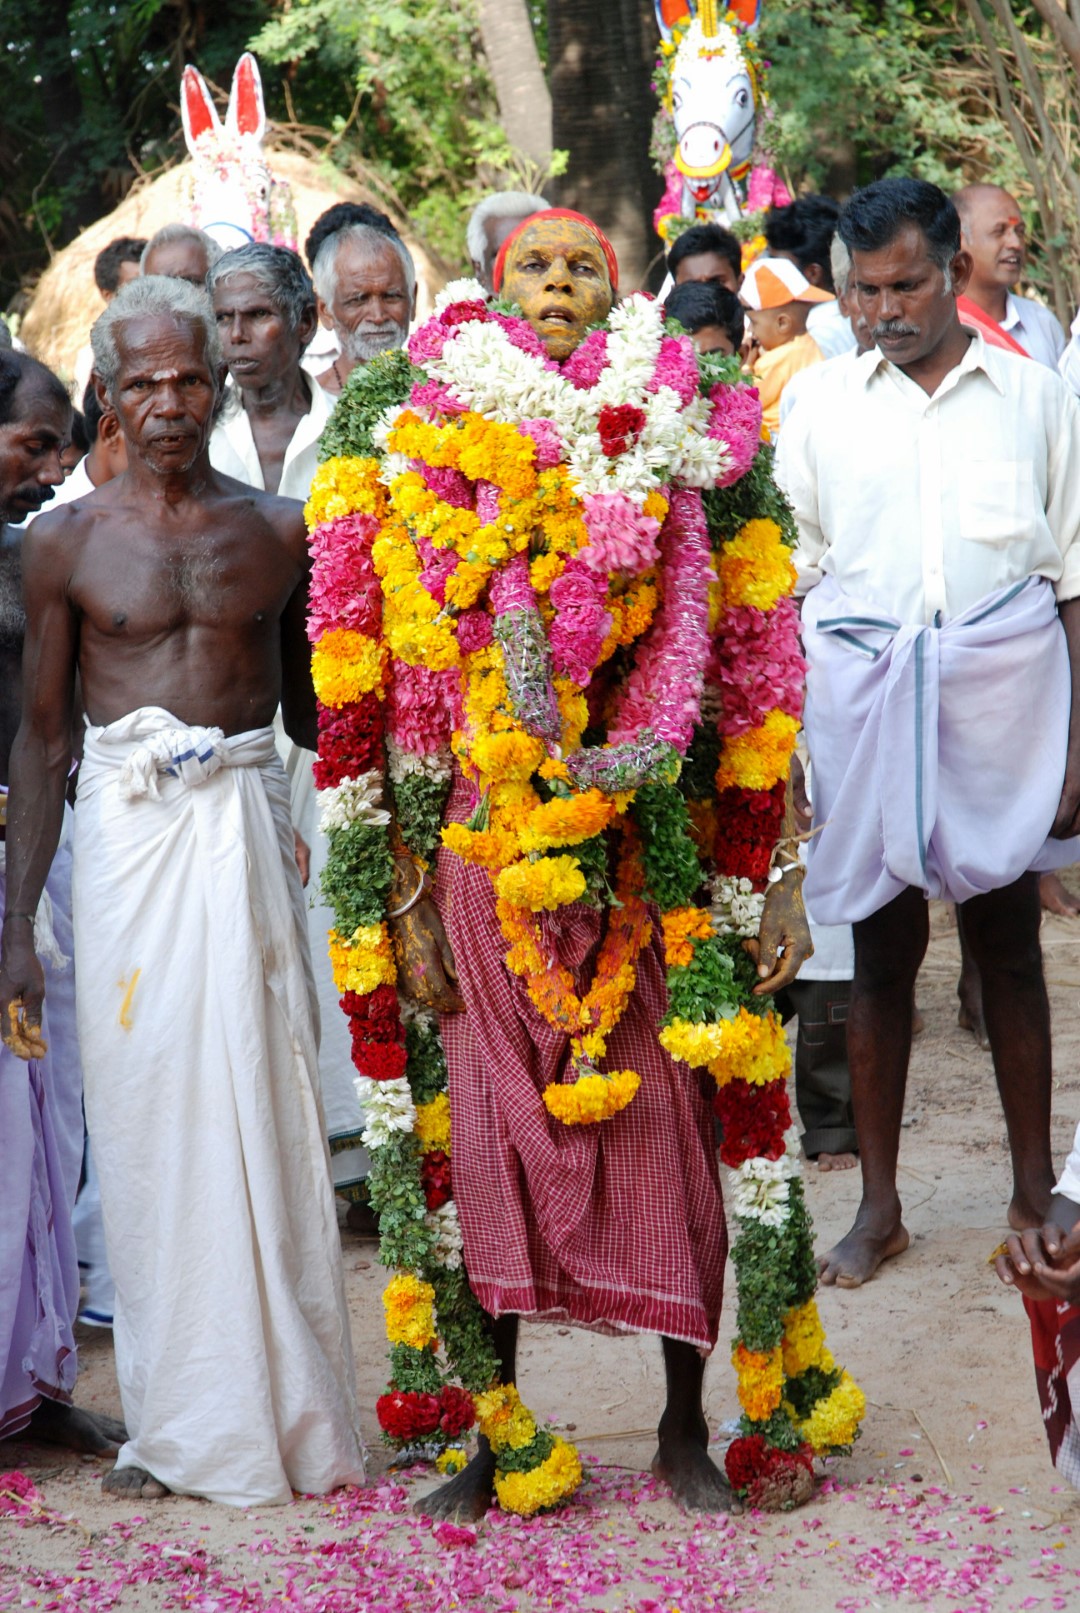 <span style="font-weight:normal;">Weighed down by dozens of garlands given as offerings, the <i>sami-adi</i>’s transformation is complete: where a man stood just minutes ago, the god Ayyanar has taken his place among his followers.</span>